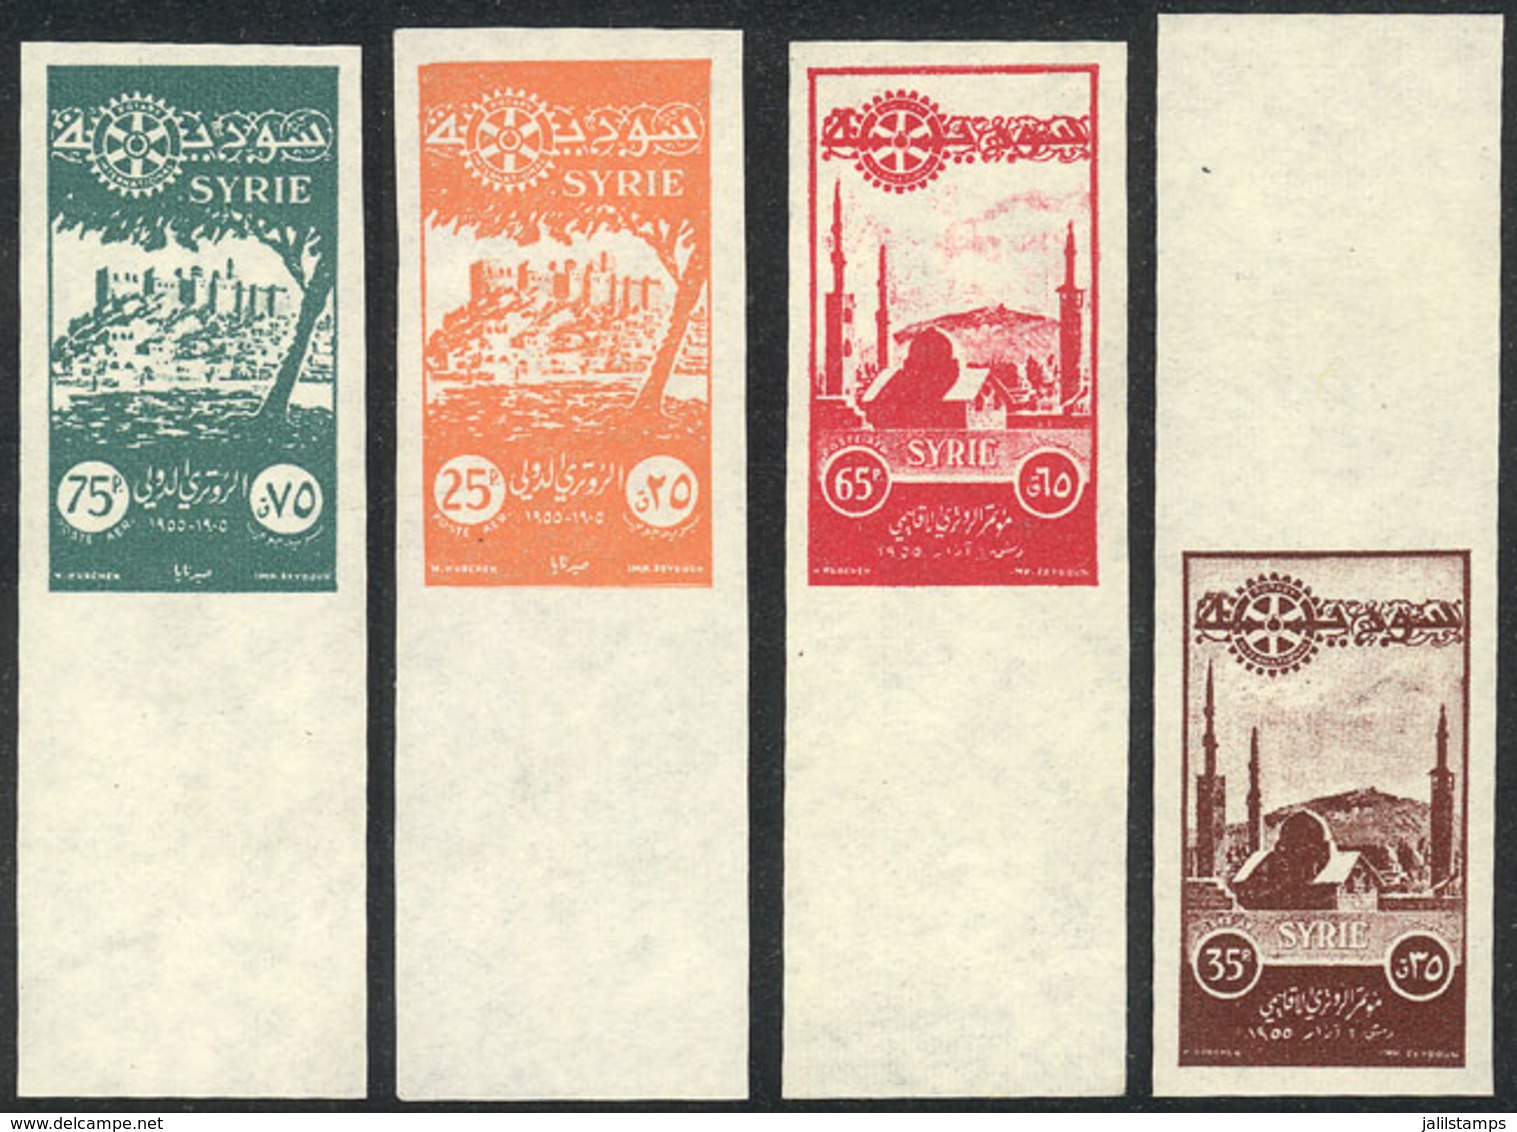 SYRIA: Sc.C187/190, 1955 Rotary International, 4 IMPERFORATE Values In Different Colors From The Original, PROOFS, Excel - Syrië